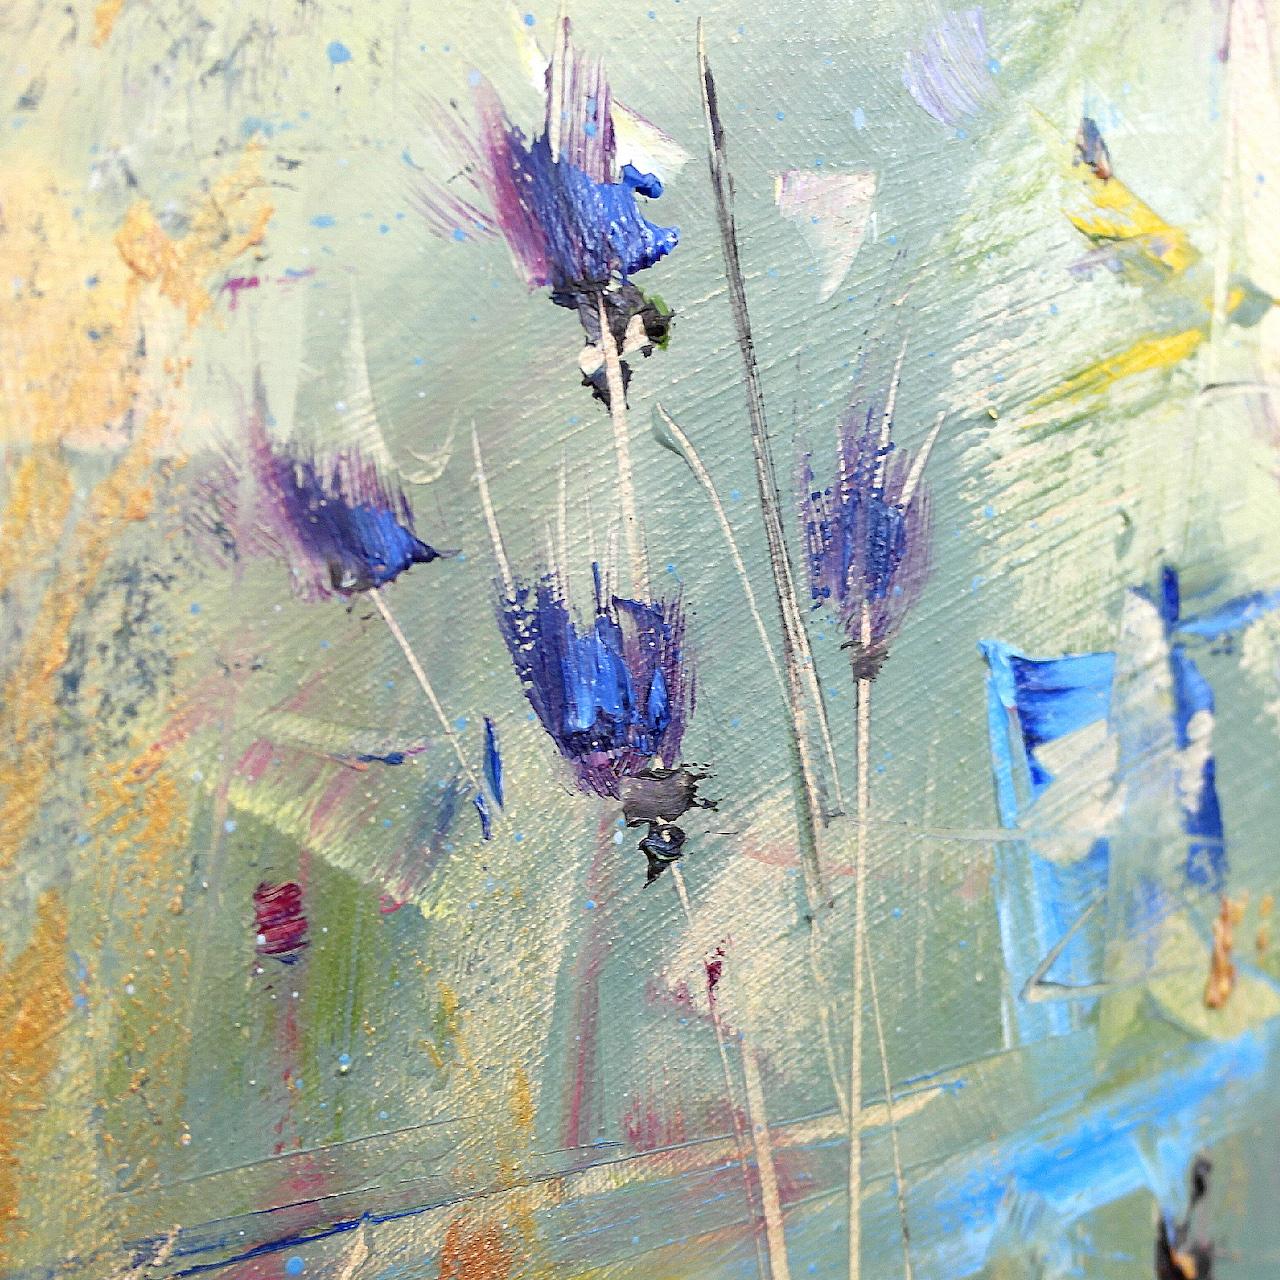 Libbi Gooch, Lower Field with Thistles, Bright Semi-Abstract Landscape Painting 2